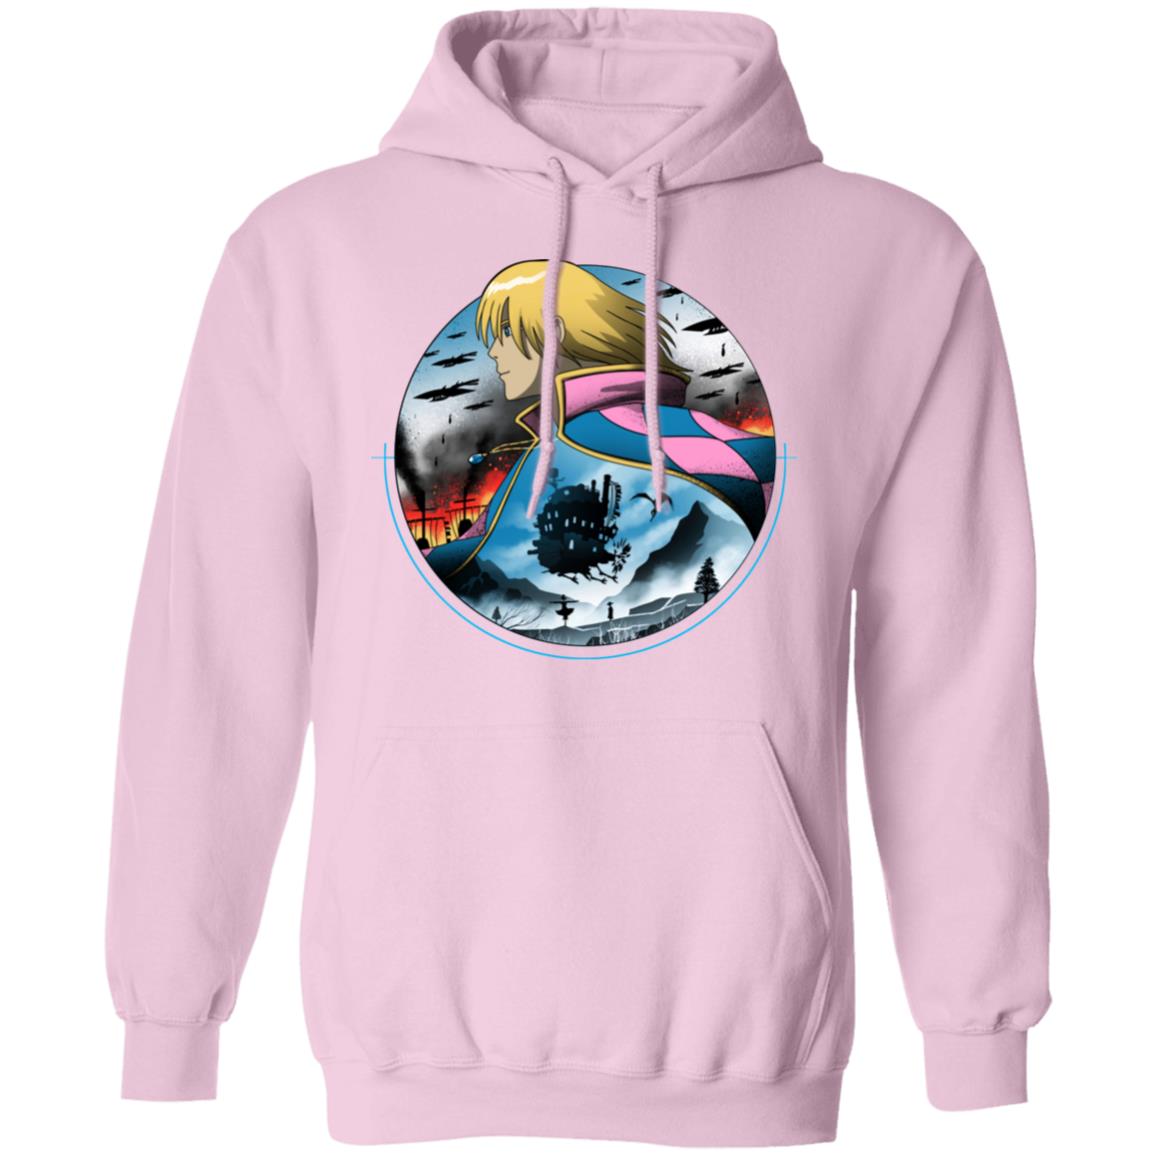 Howl’s Moving Castle – The Journey Hoodie